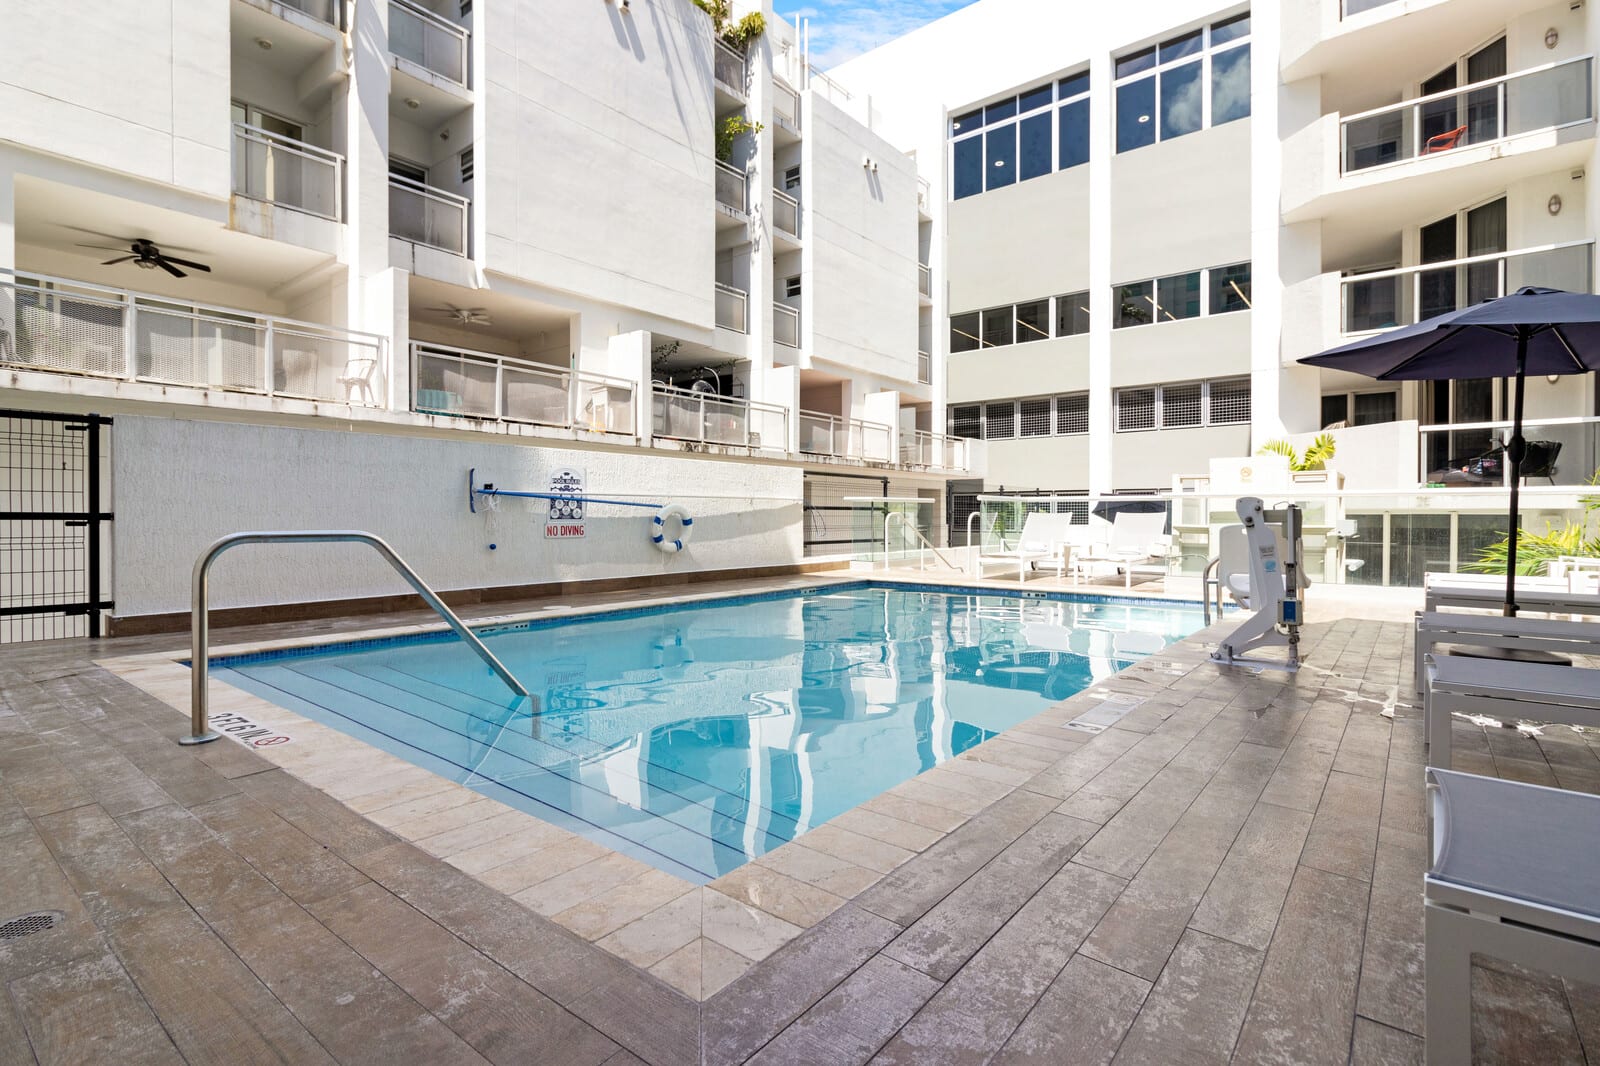 Property Image 2 - Property Manager | 10min to Beach | Pool + Balcony | Brickell